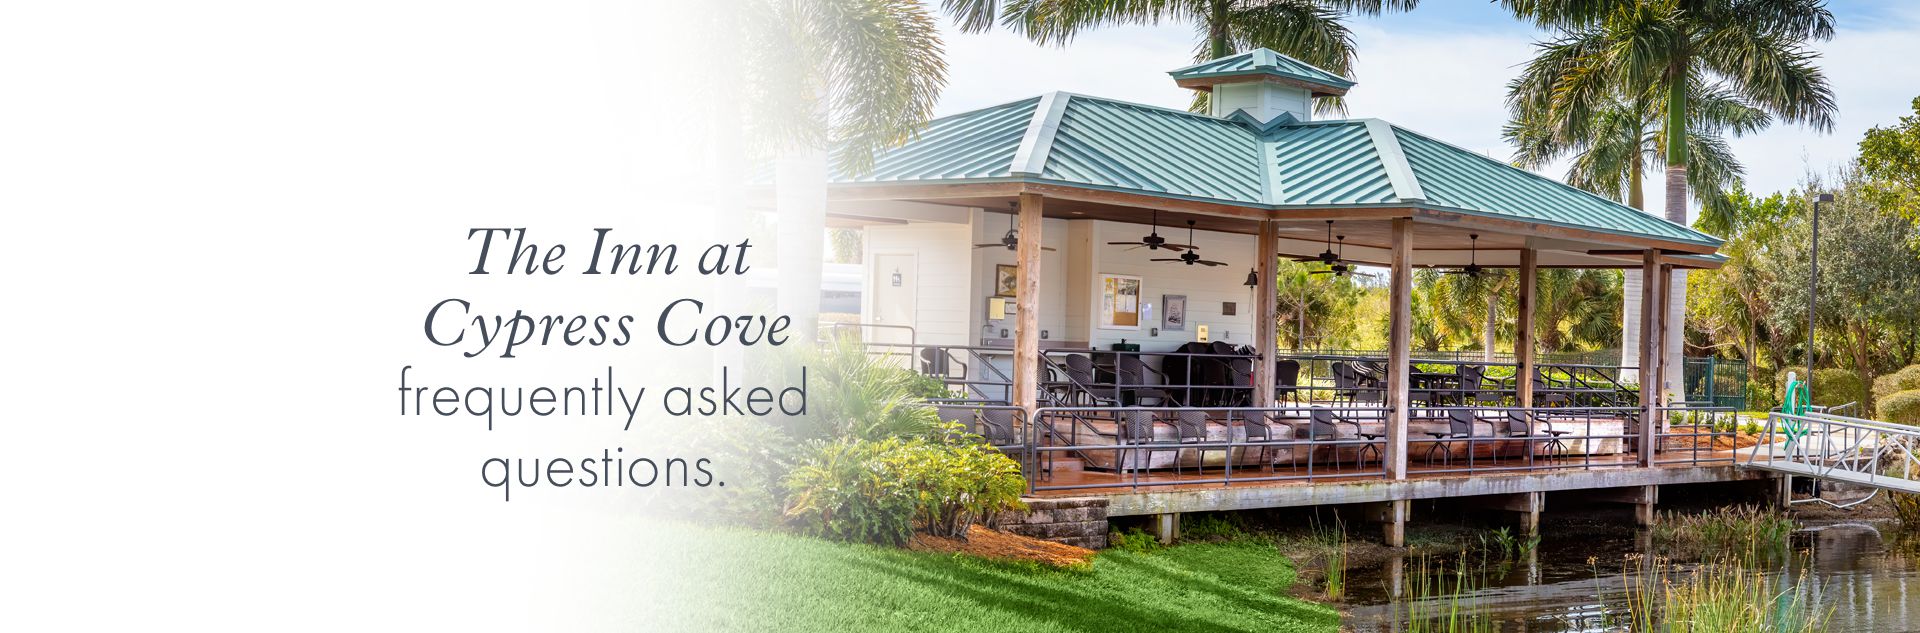 The Inn at Cypress Cove frequently asked questions.